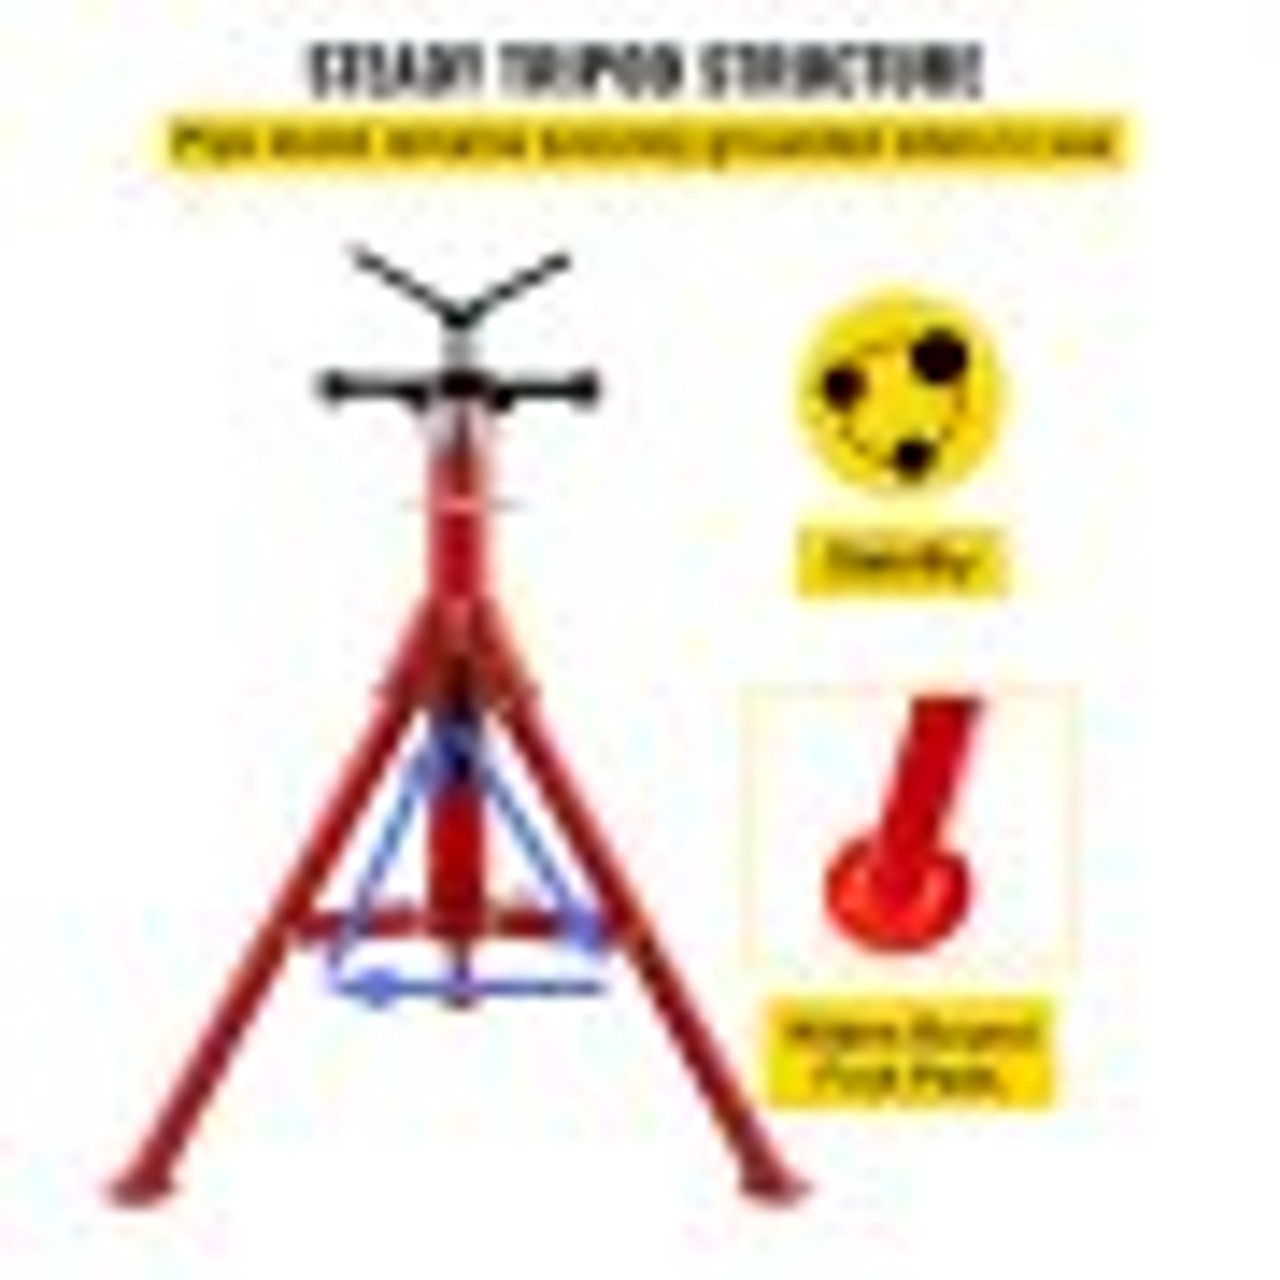 V Head Pipe Stand 1/8"-12" Capacity, Adjustable Height 24"-42", Pipe Jack Stands 2500 lb. Load Capacity, Portable Folding Pipe Stands, Carbon Steel Body More Durable